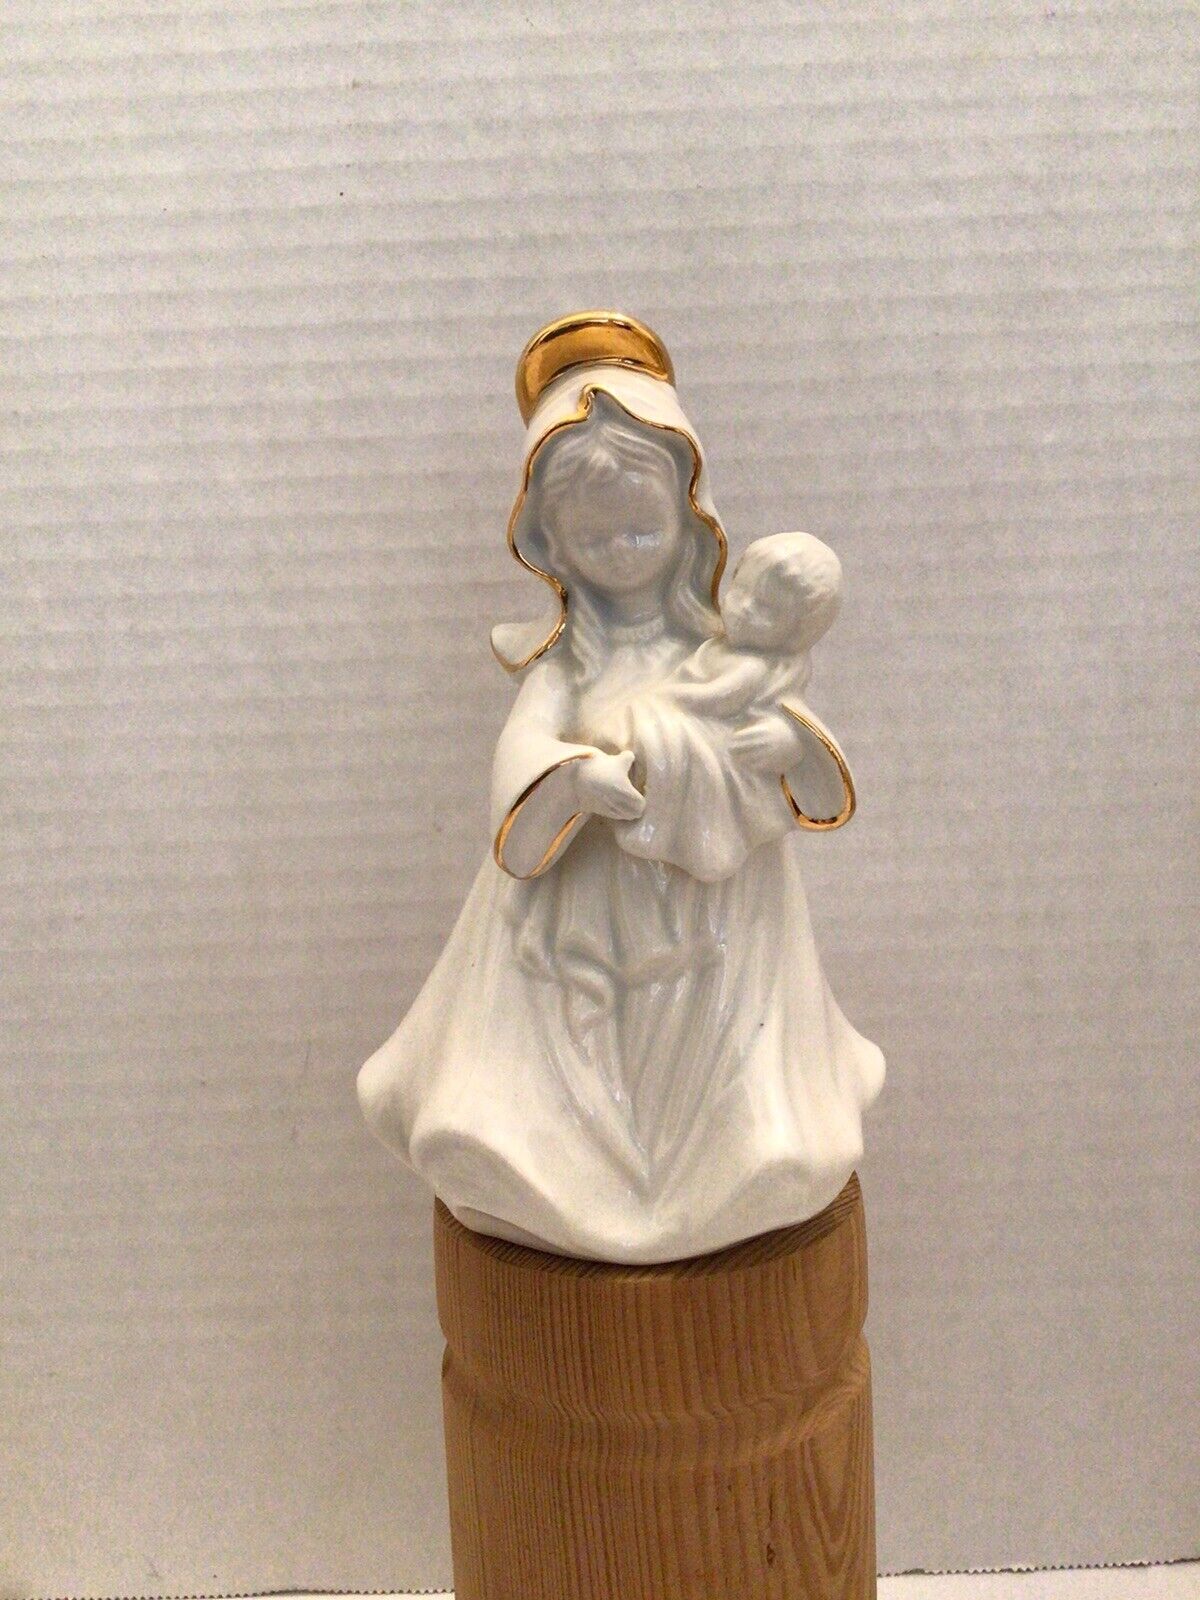 Madonna And Child Figurine White Ceramic W/Gold Accents 5” tall Beautiful Piece